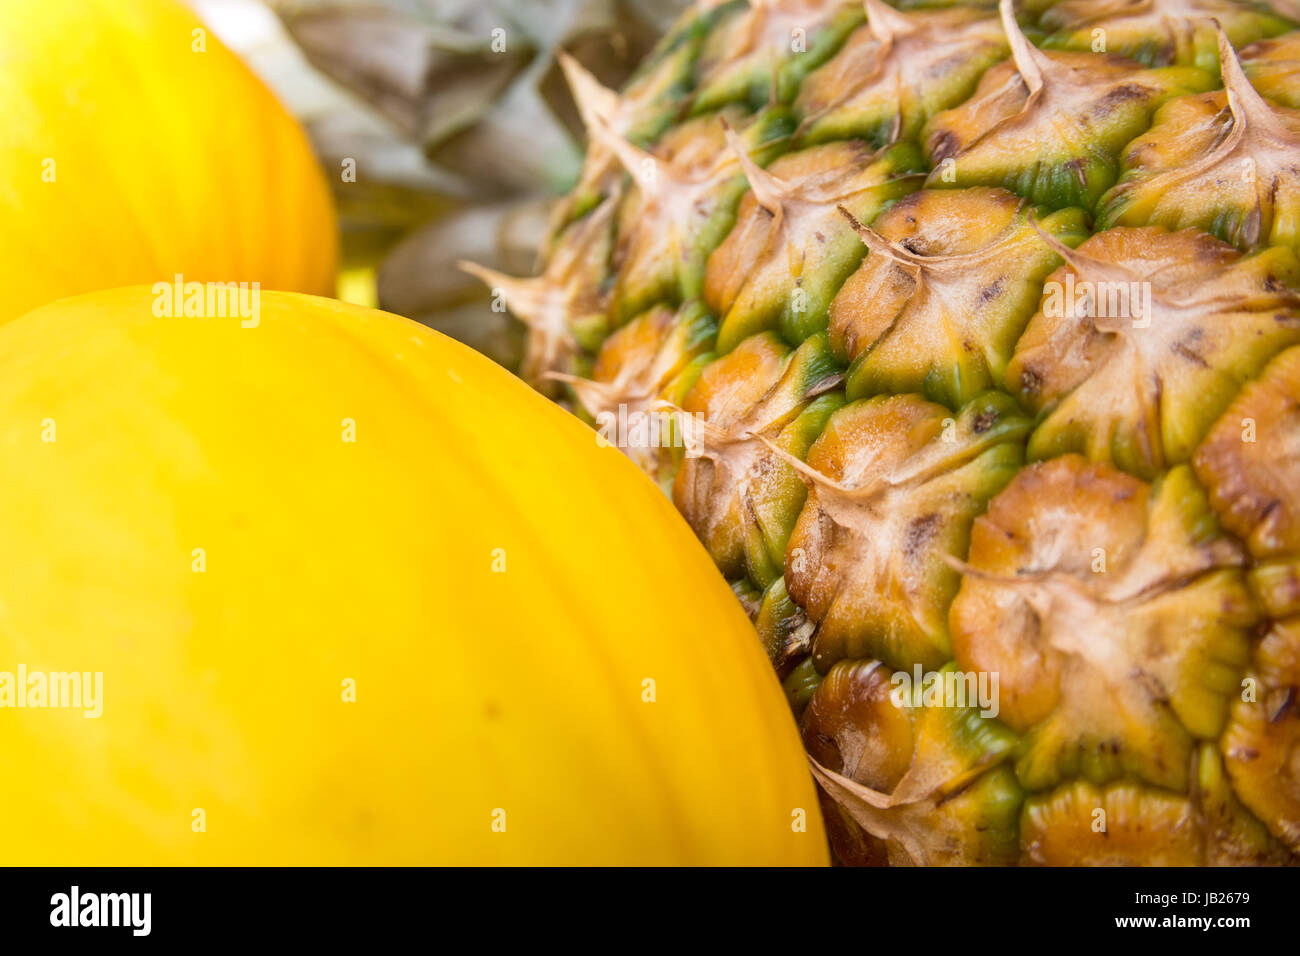 Ripe pine-apple bunch of yellow melons on farmer's market, Asia, skin texture, close up, vibrant colors Stock Photo